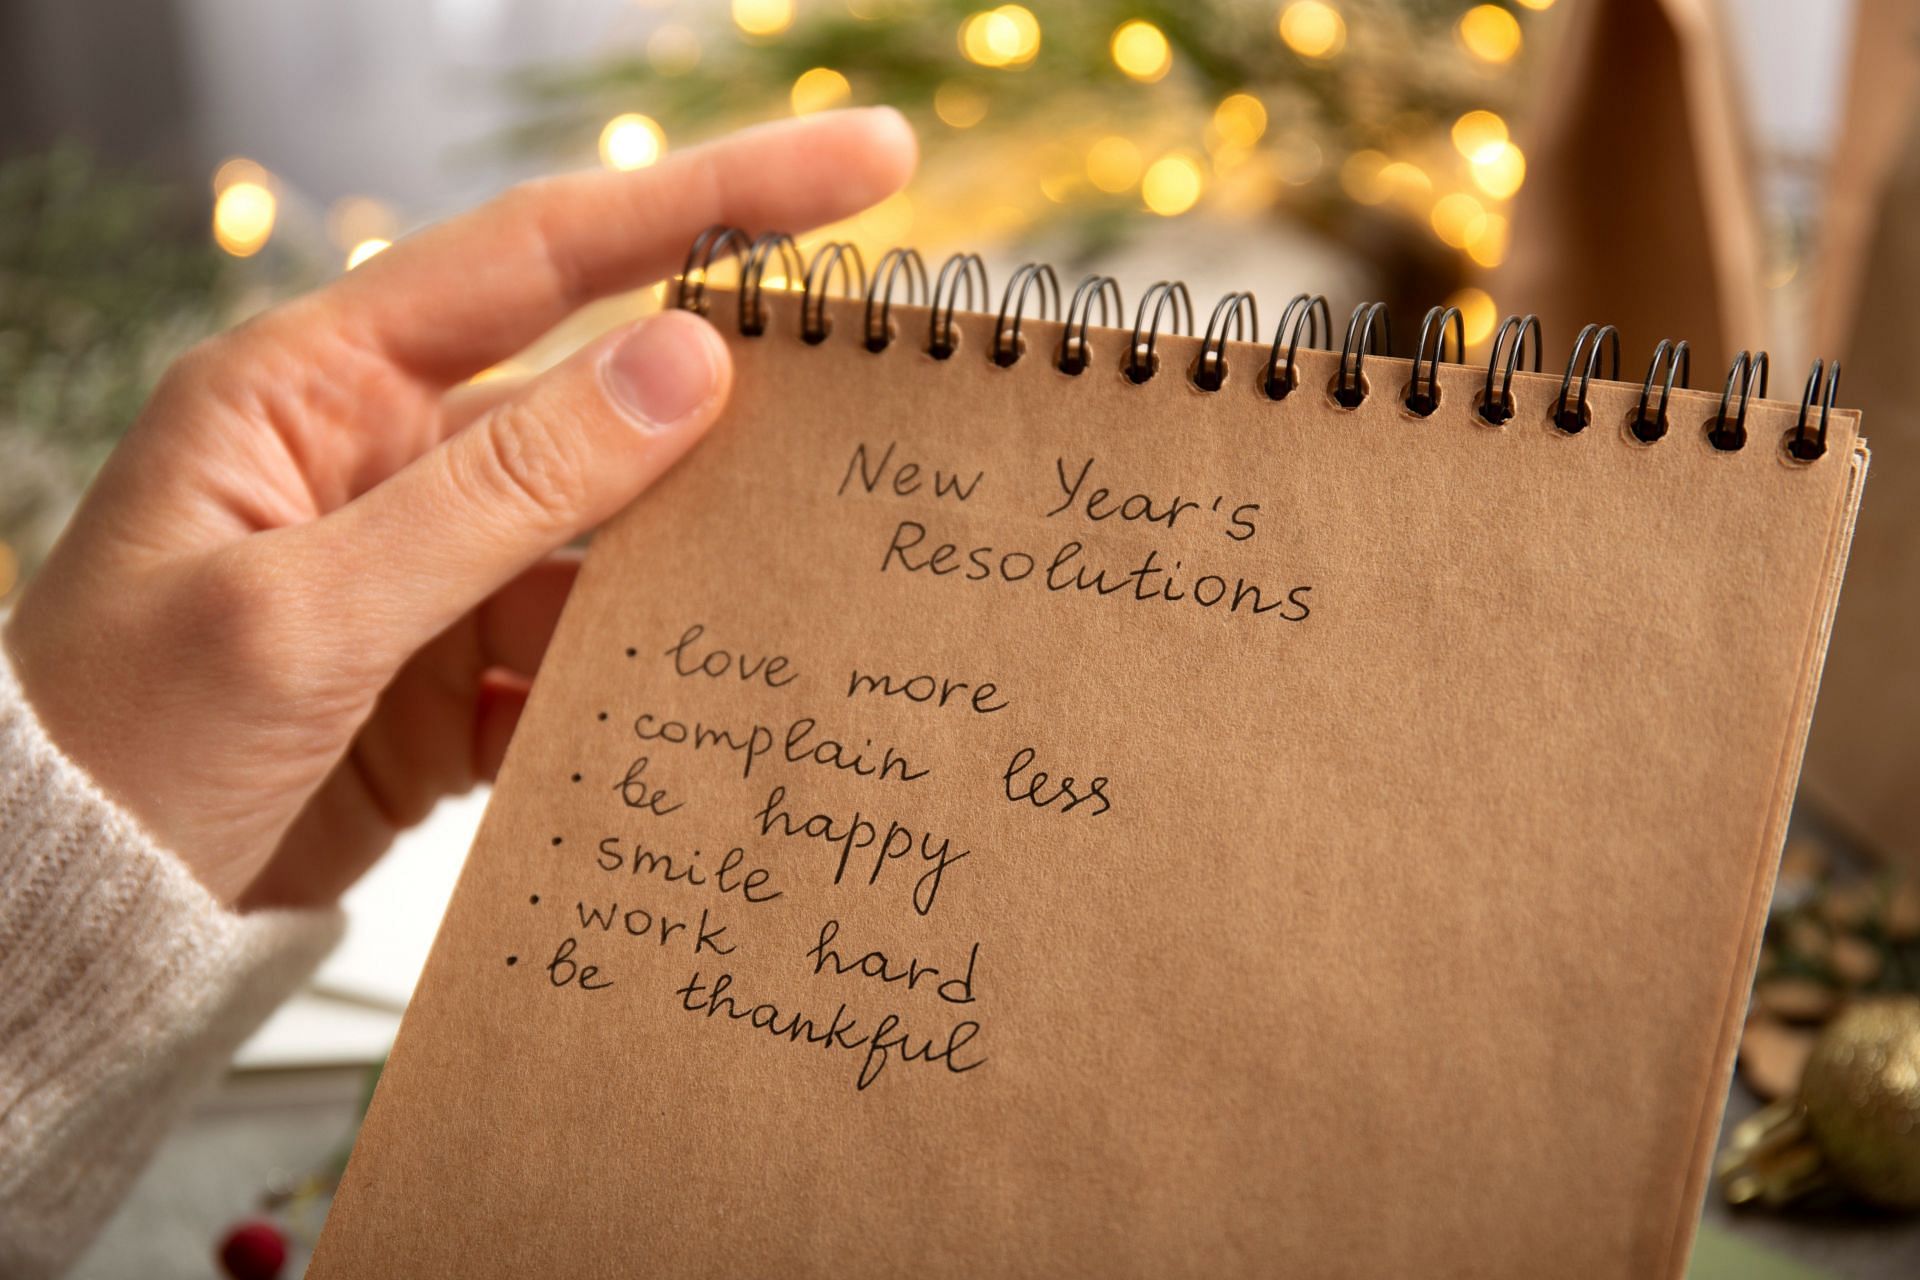 New year resolutions are to make you happy and feel better. (Image via Freepik/ Freepik)